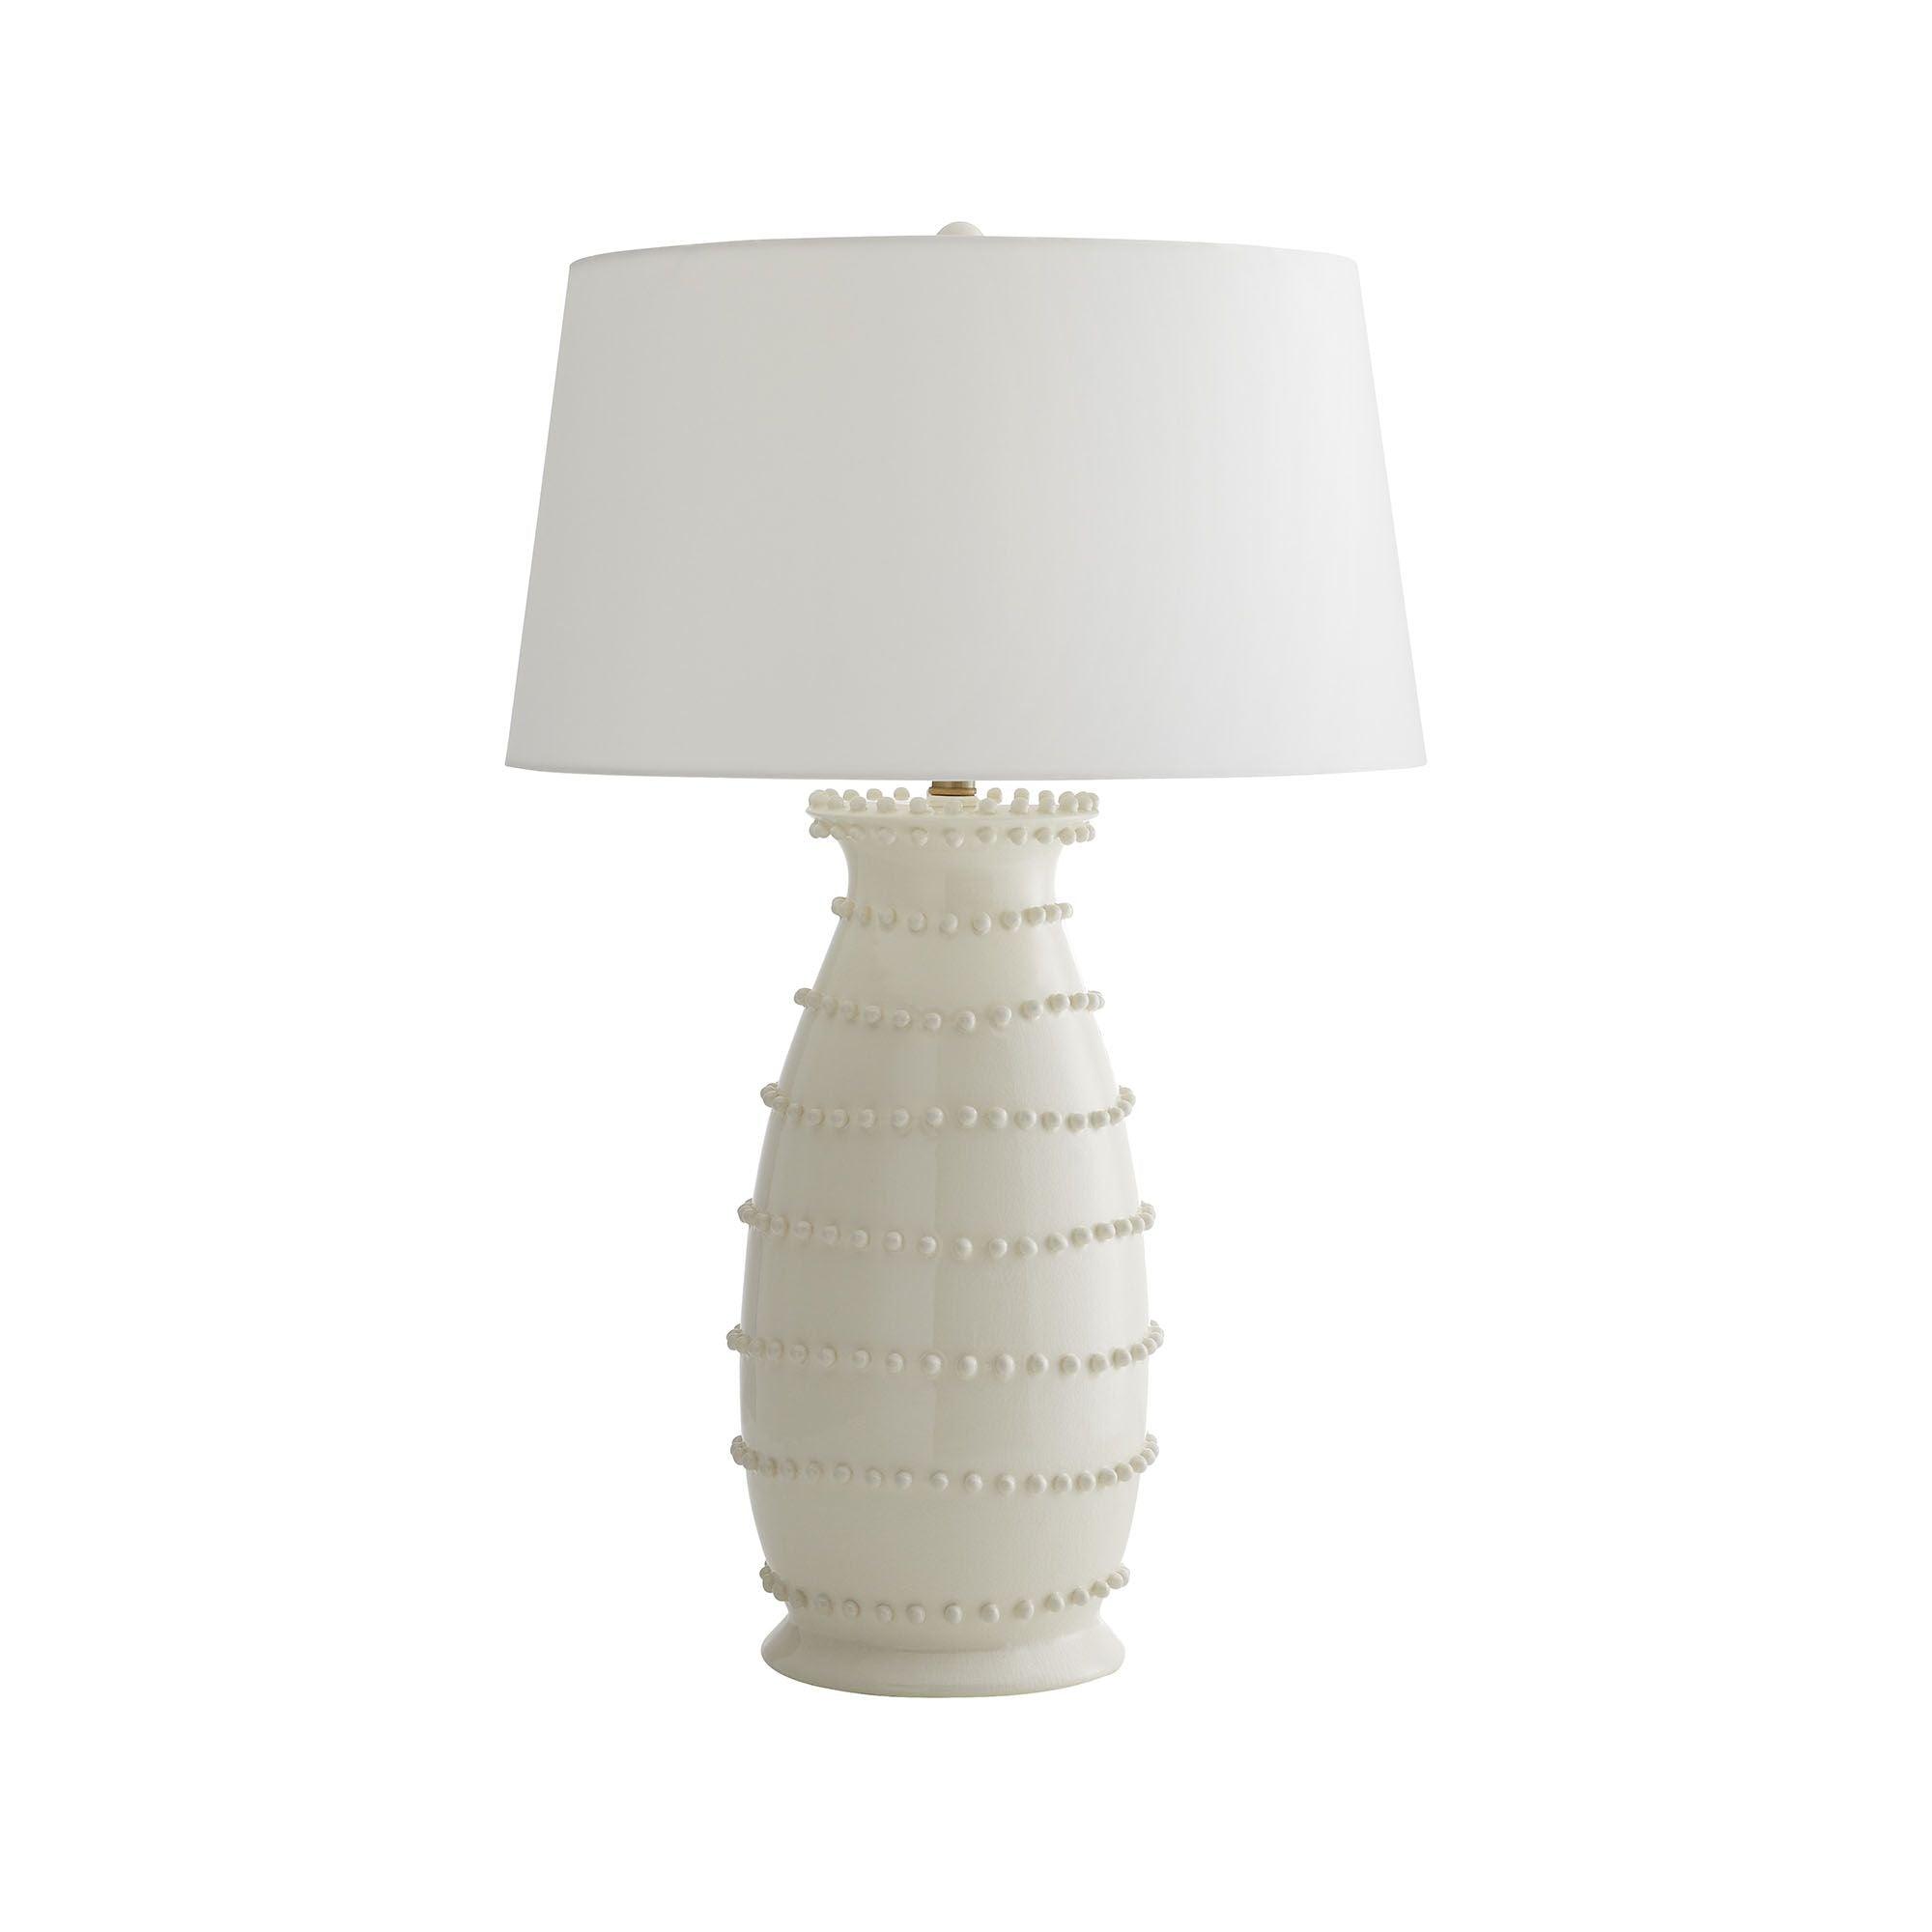 Arteriors - Spitzy Table Lamp - DC17005-361 | Montreal Lighting & Hardware